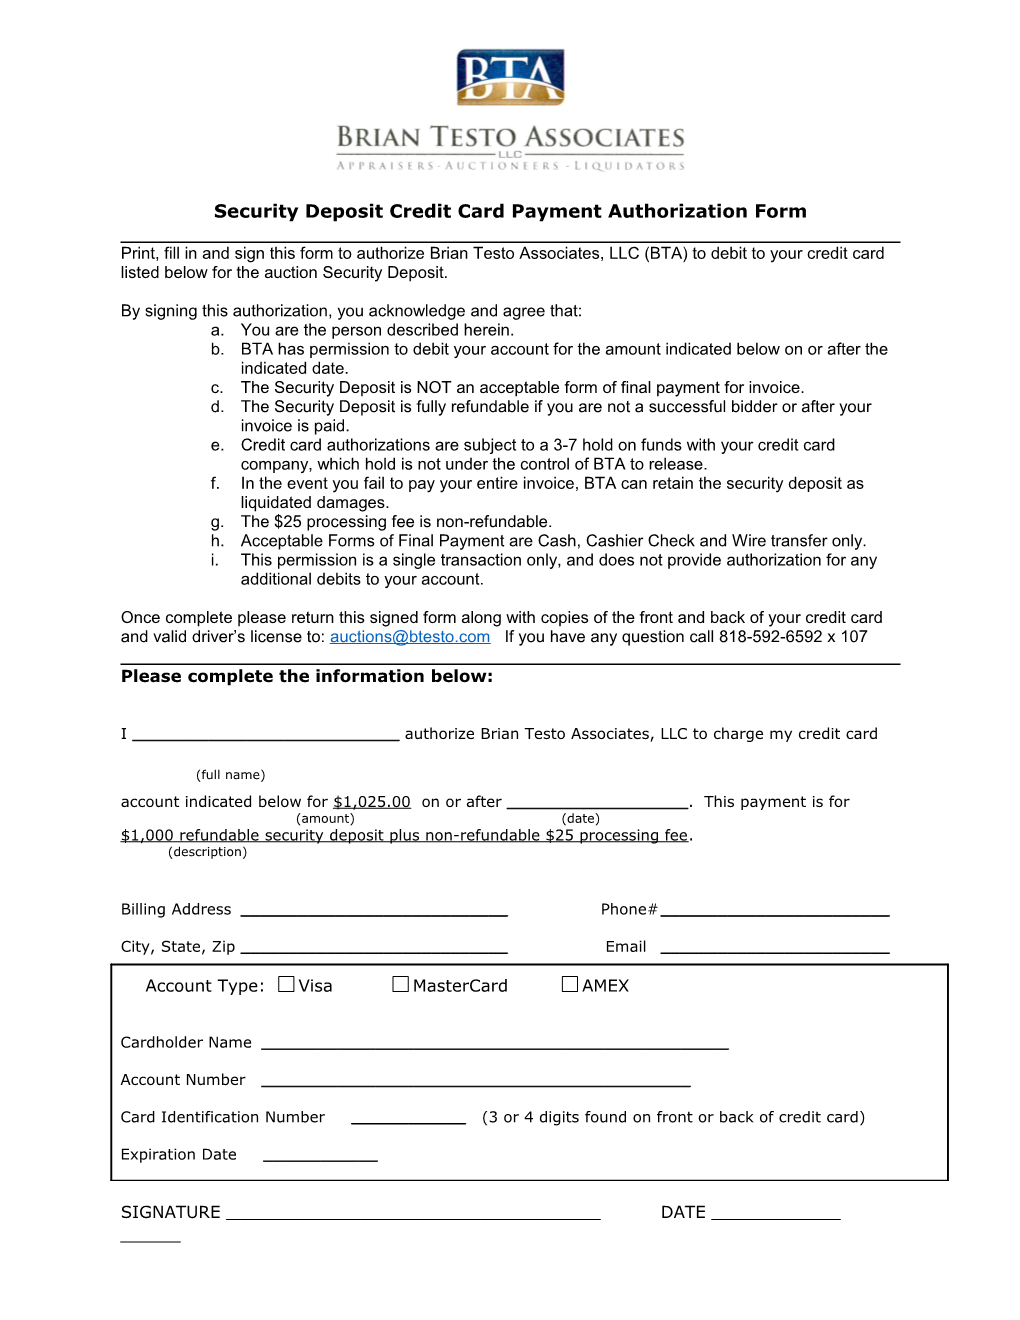 One Time Credit Card Payment Authorization Form s2